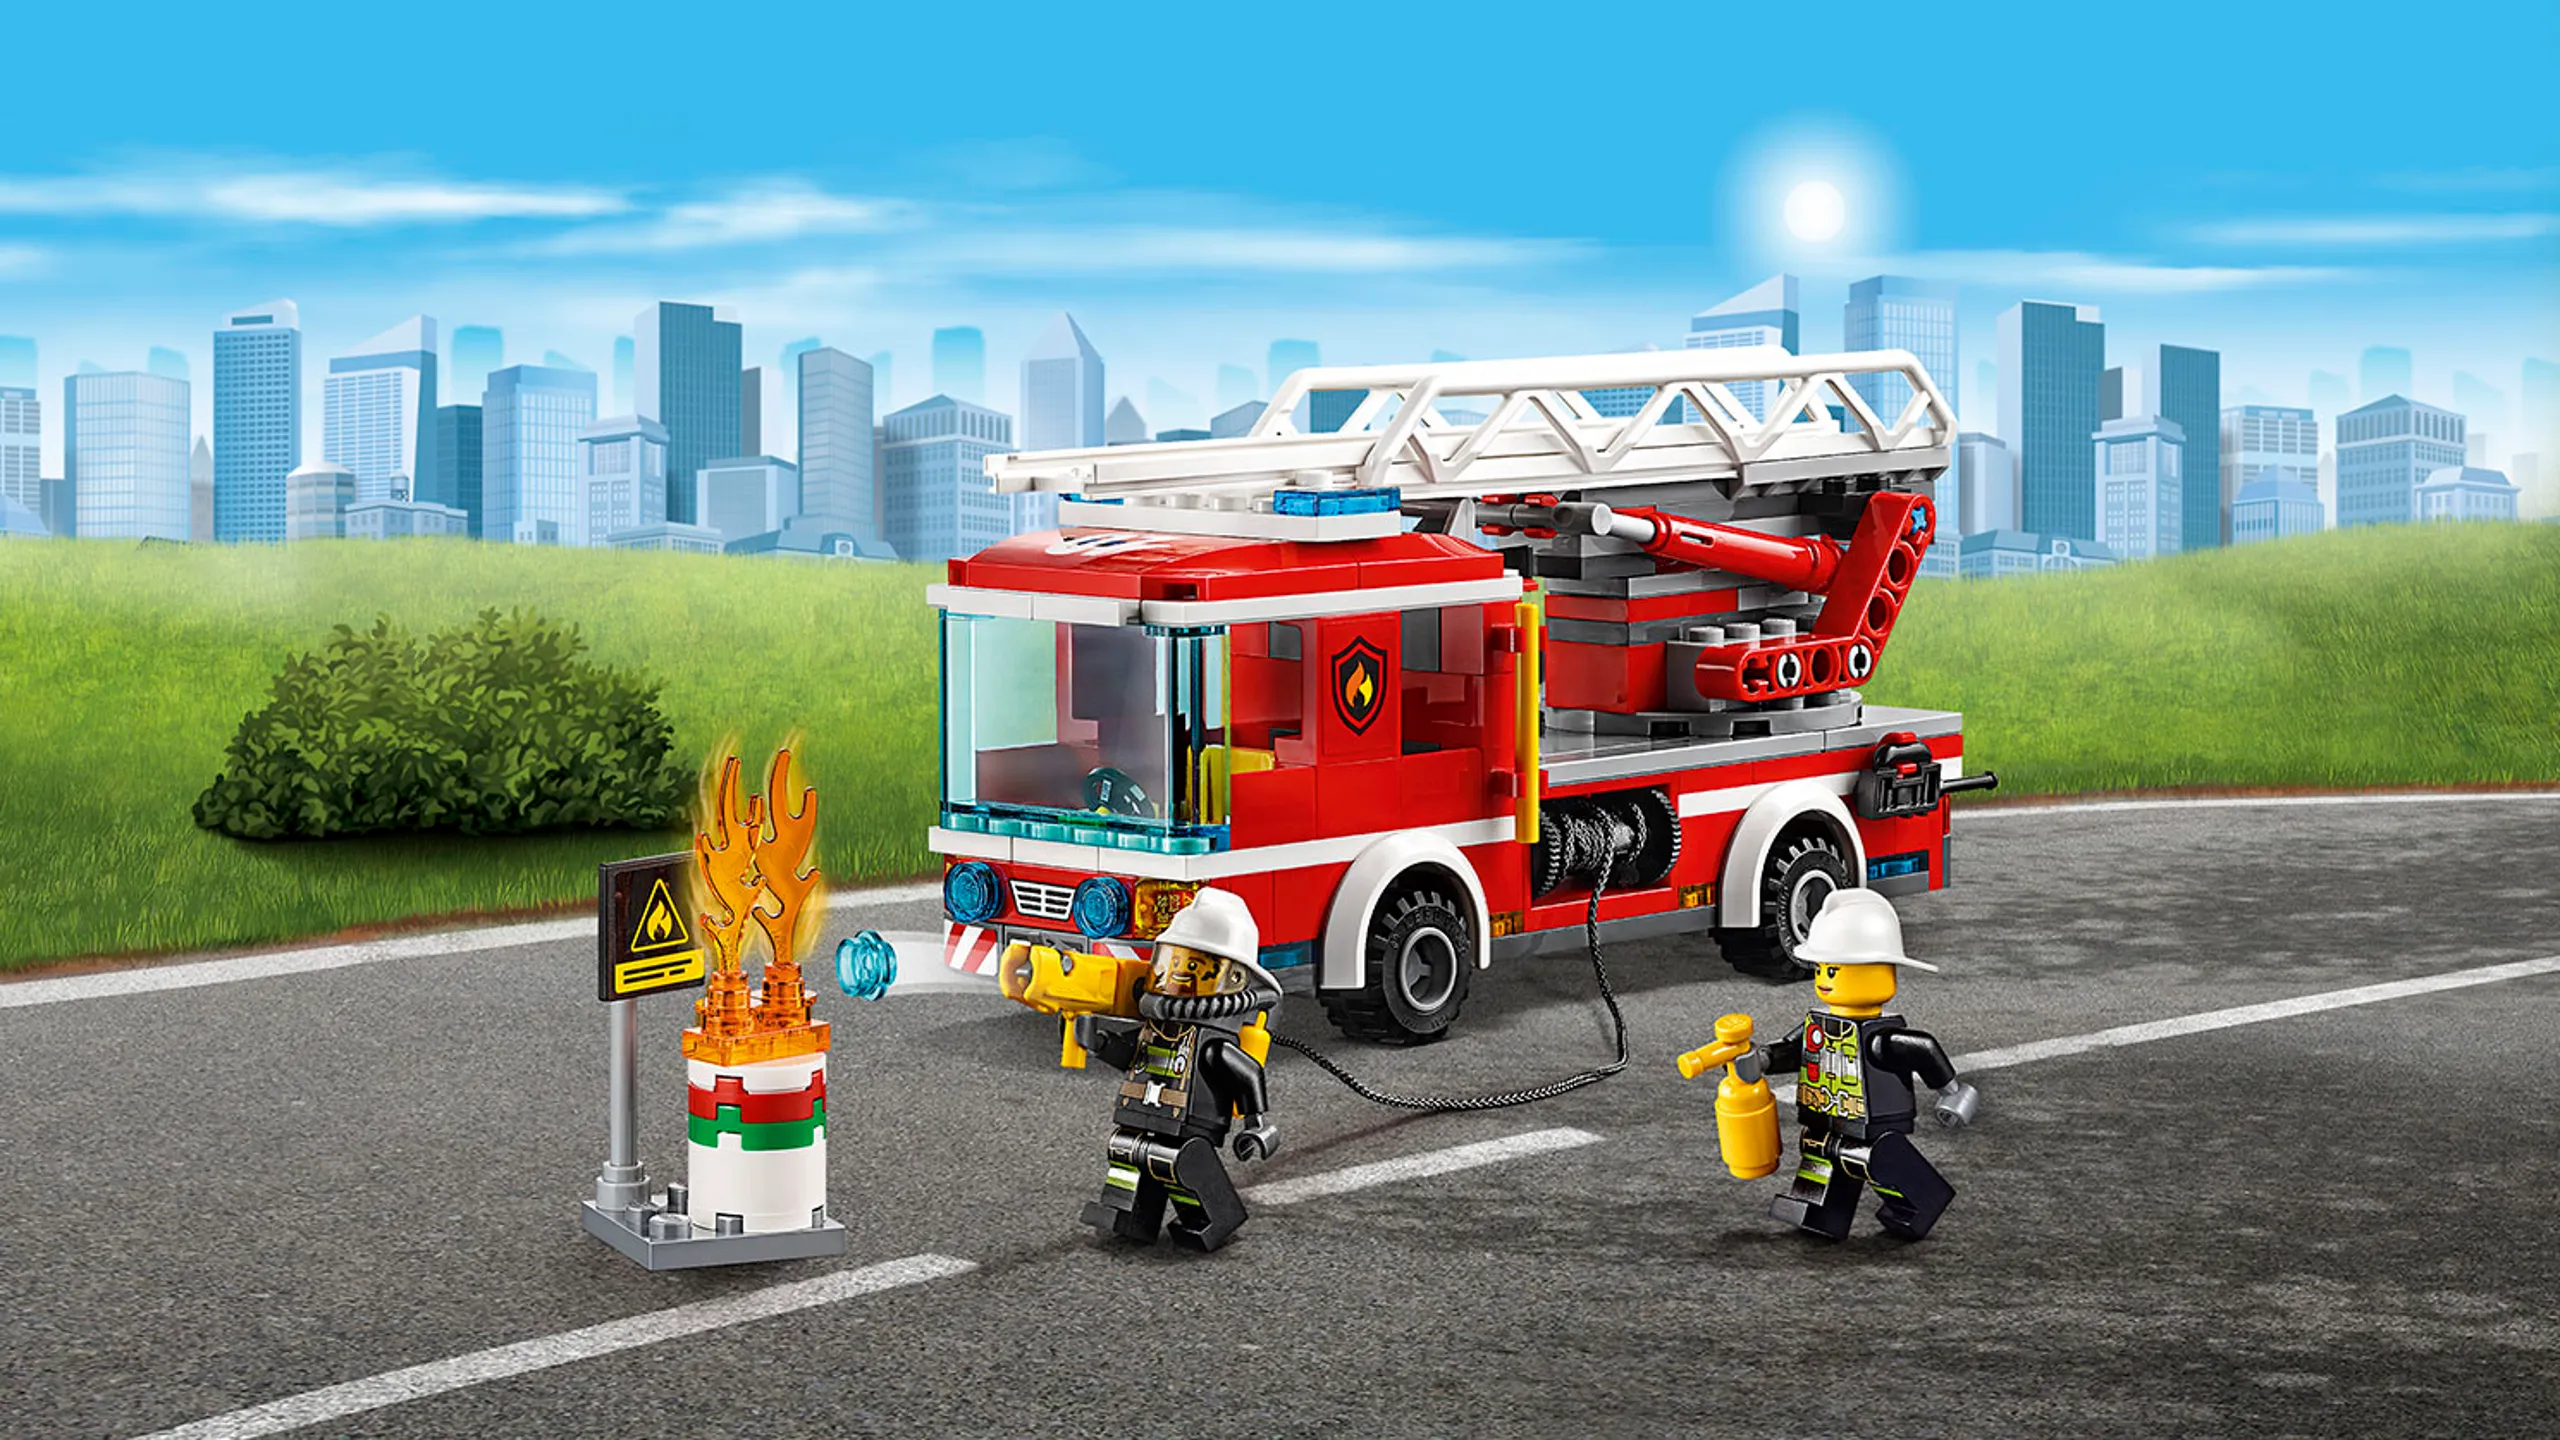 LEGO City Fire - 60107 Fire Ladder Truck - Race to the scene in the Fire Ladder Truck with the fire fighters to put out the fire in the oil barrel.